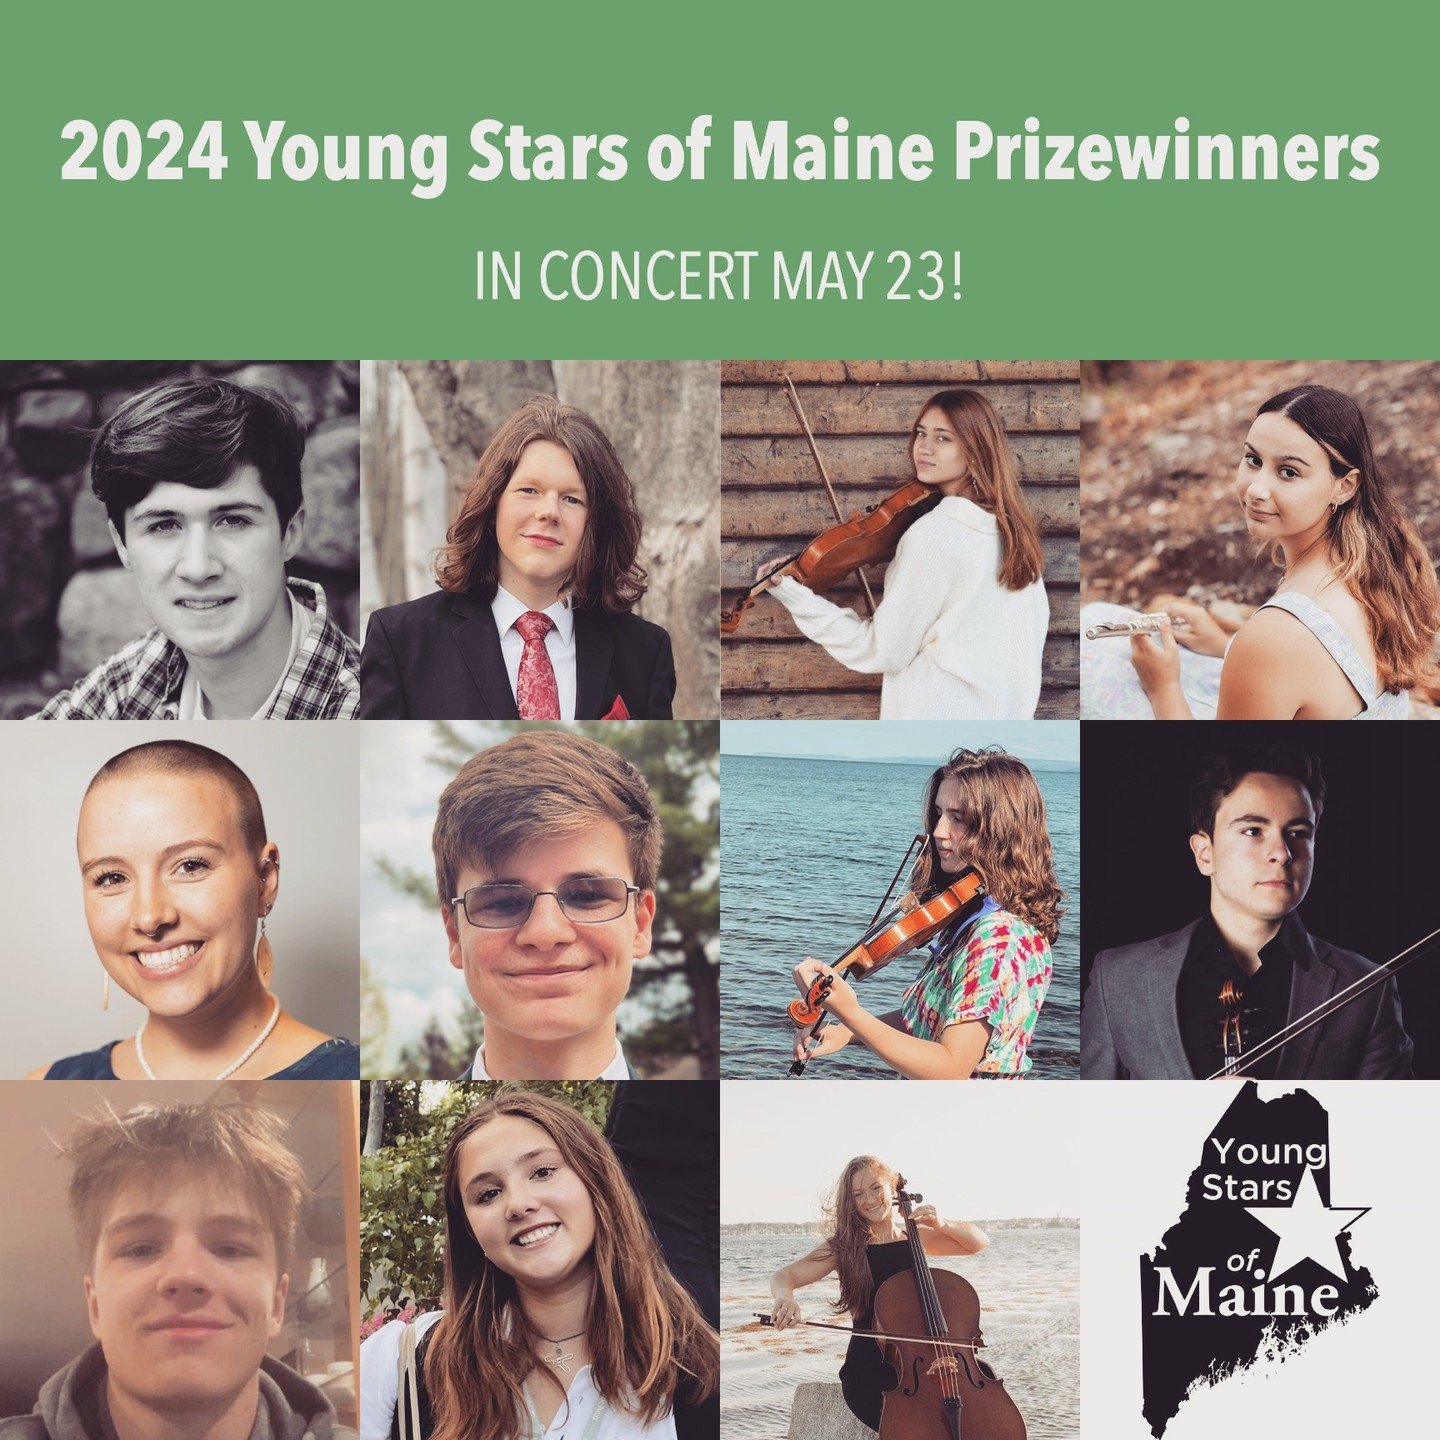 Come celebrate 11 incredible young musicians from Maine - our 2024 Young Stars of Maine Prizewinners! They will perform a FREE concert this Thursday, May 23 at 7PM in Union Hall.

Special thank you to our concert sponsor, @bangorsavings